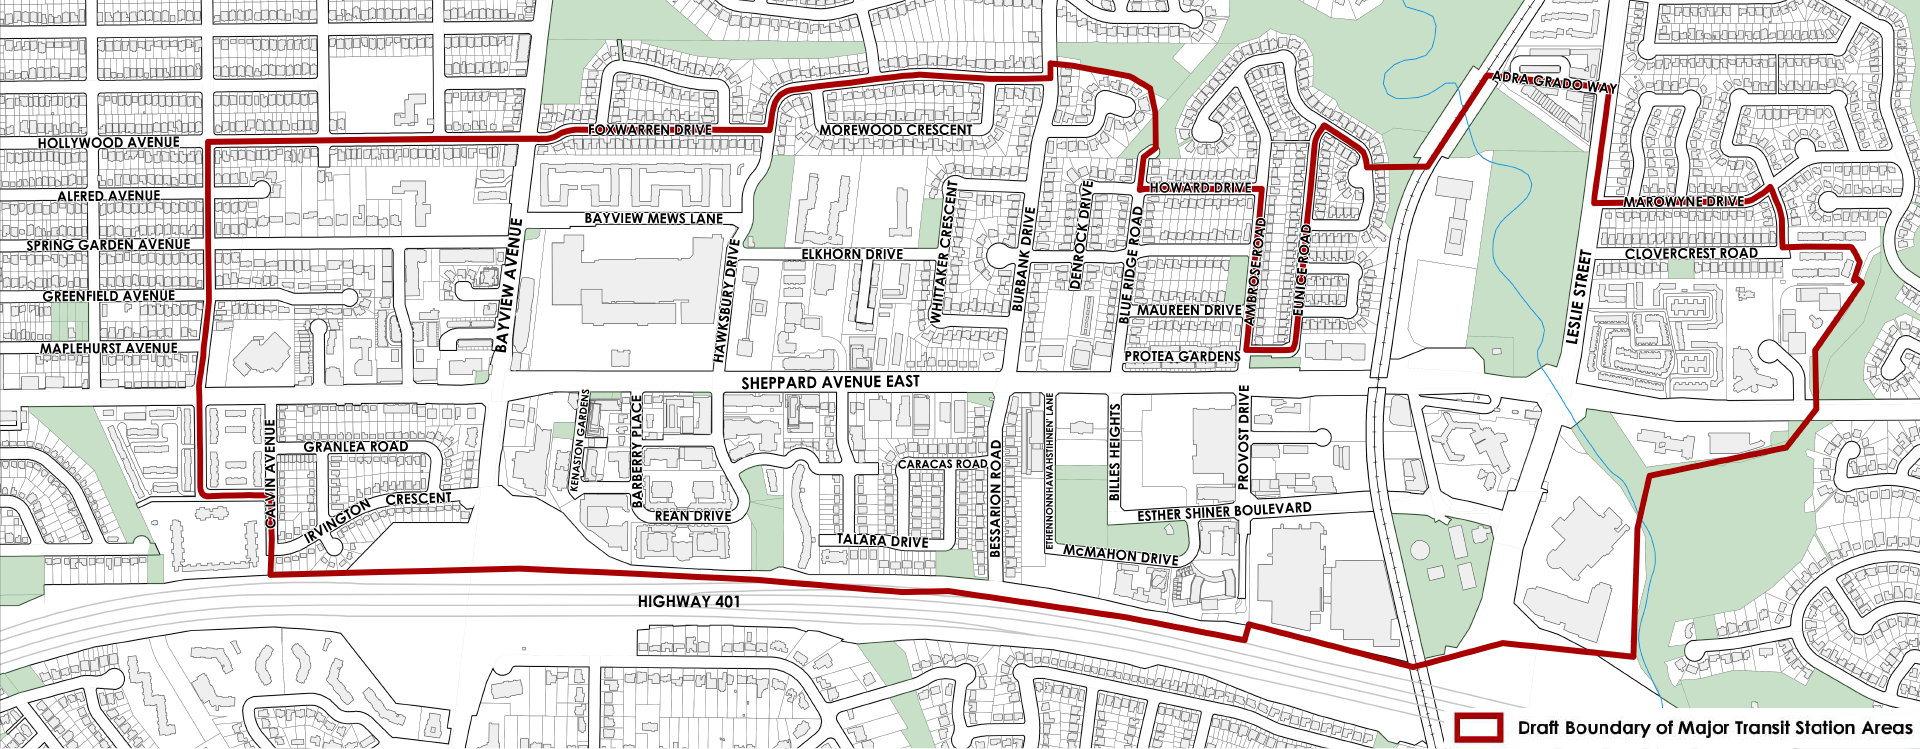 The Sheppard Avenue East Planning Review (ReNew Sheppard East) study area is bounded by Foxwarren Drive in the north, east of Leslie Street in the east, Highway 401 in the south and west of Calvin Avenue in the west.